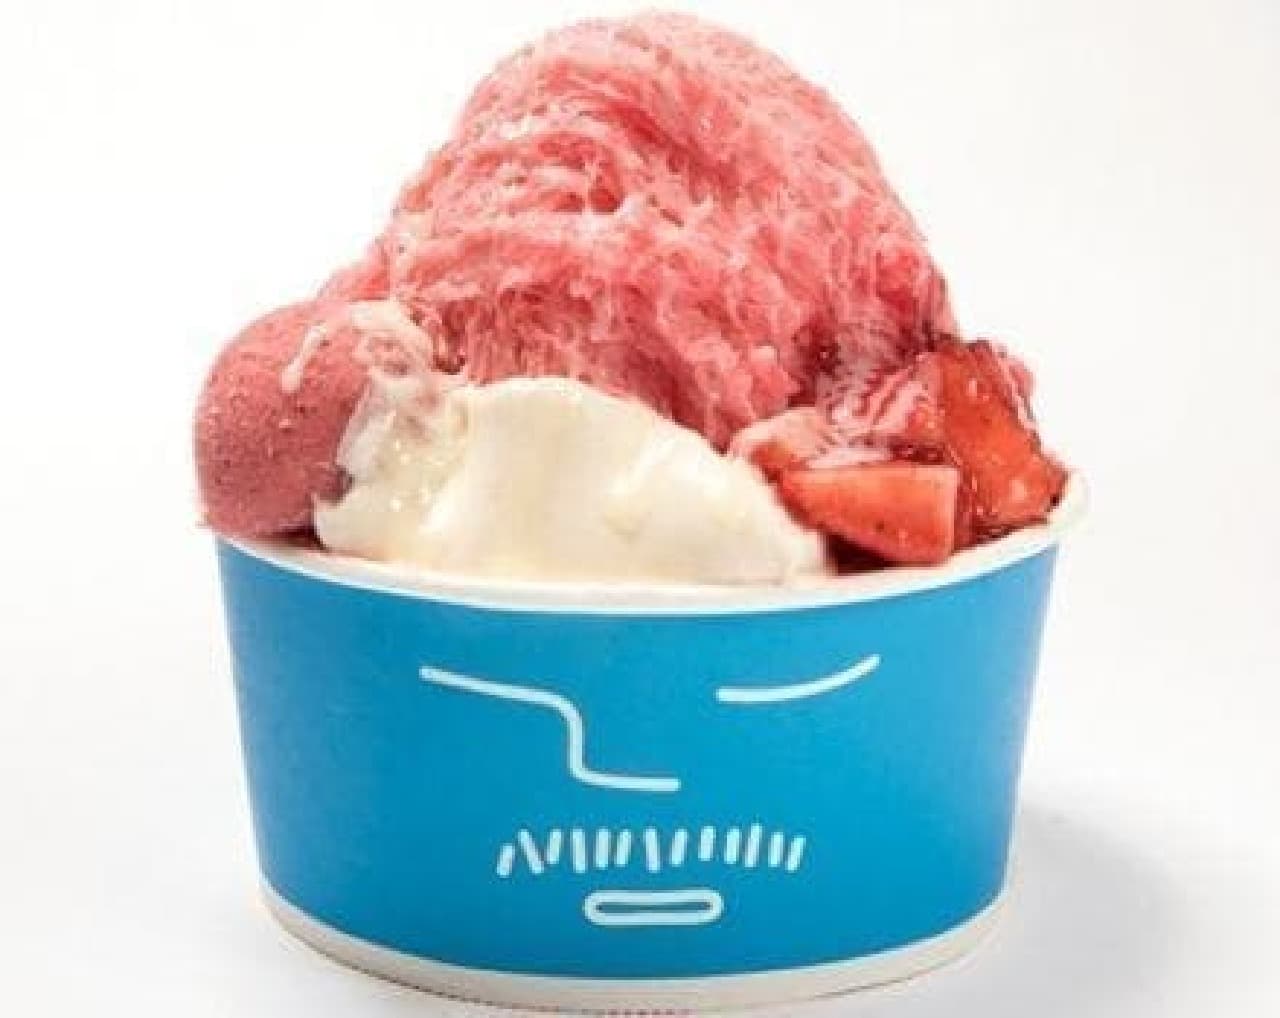 Ice monster "Strawberry shaved ice"